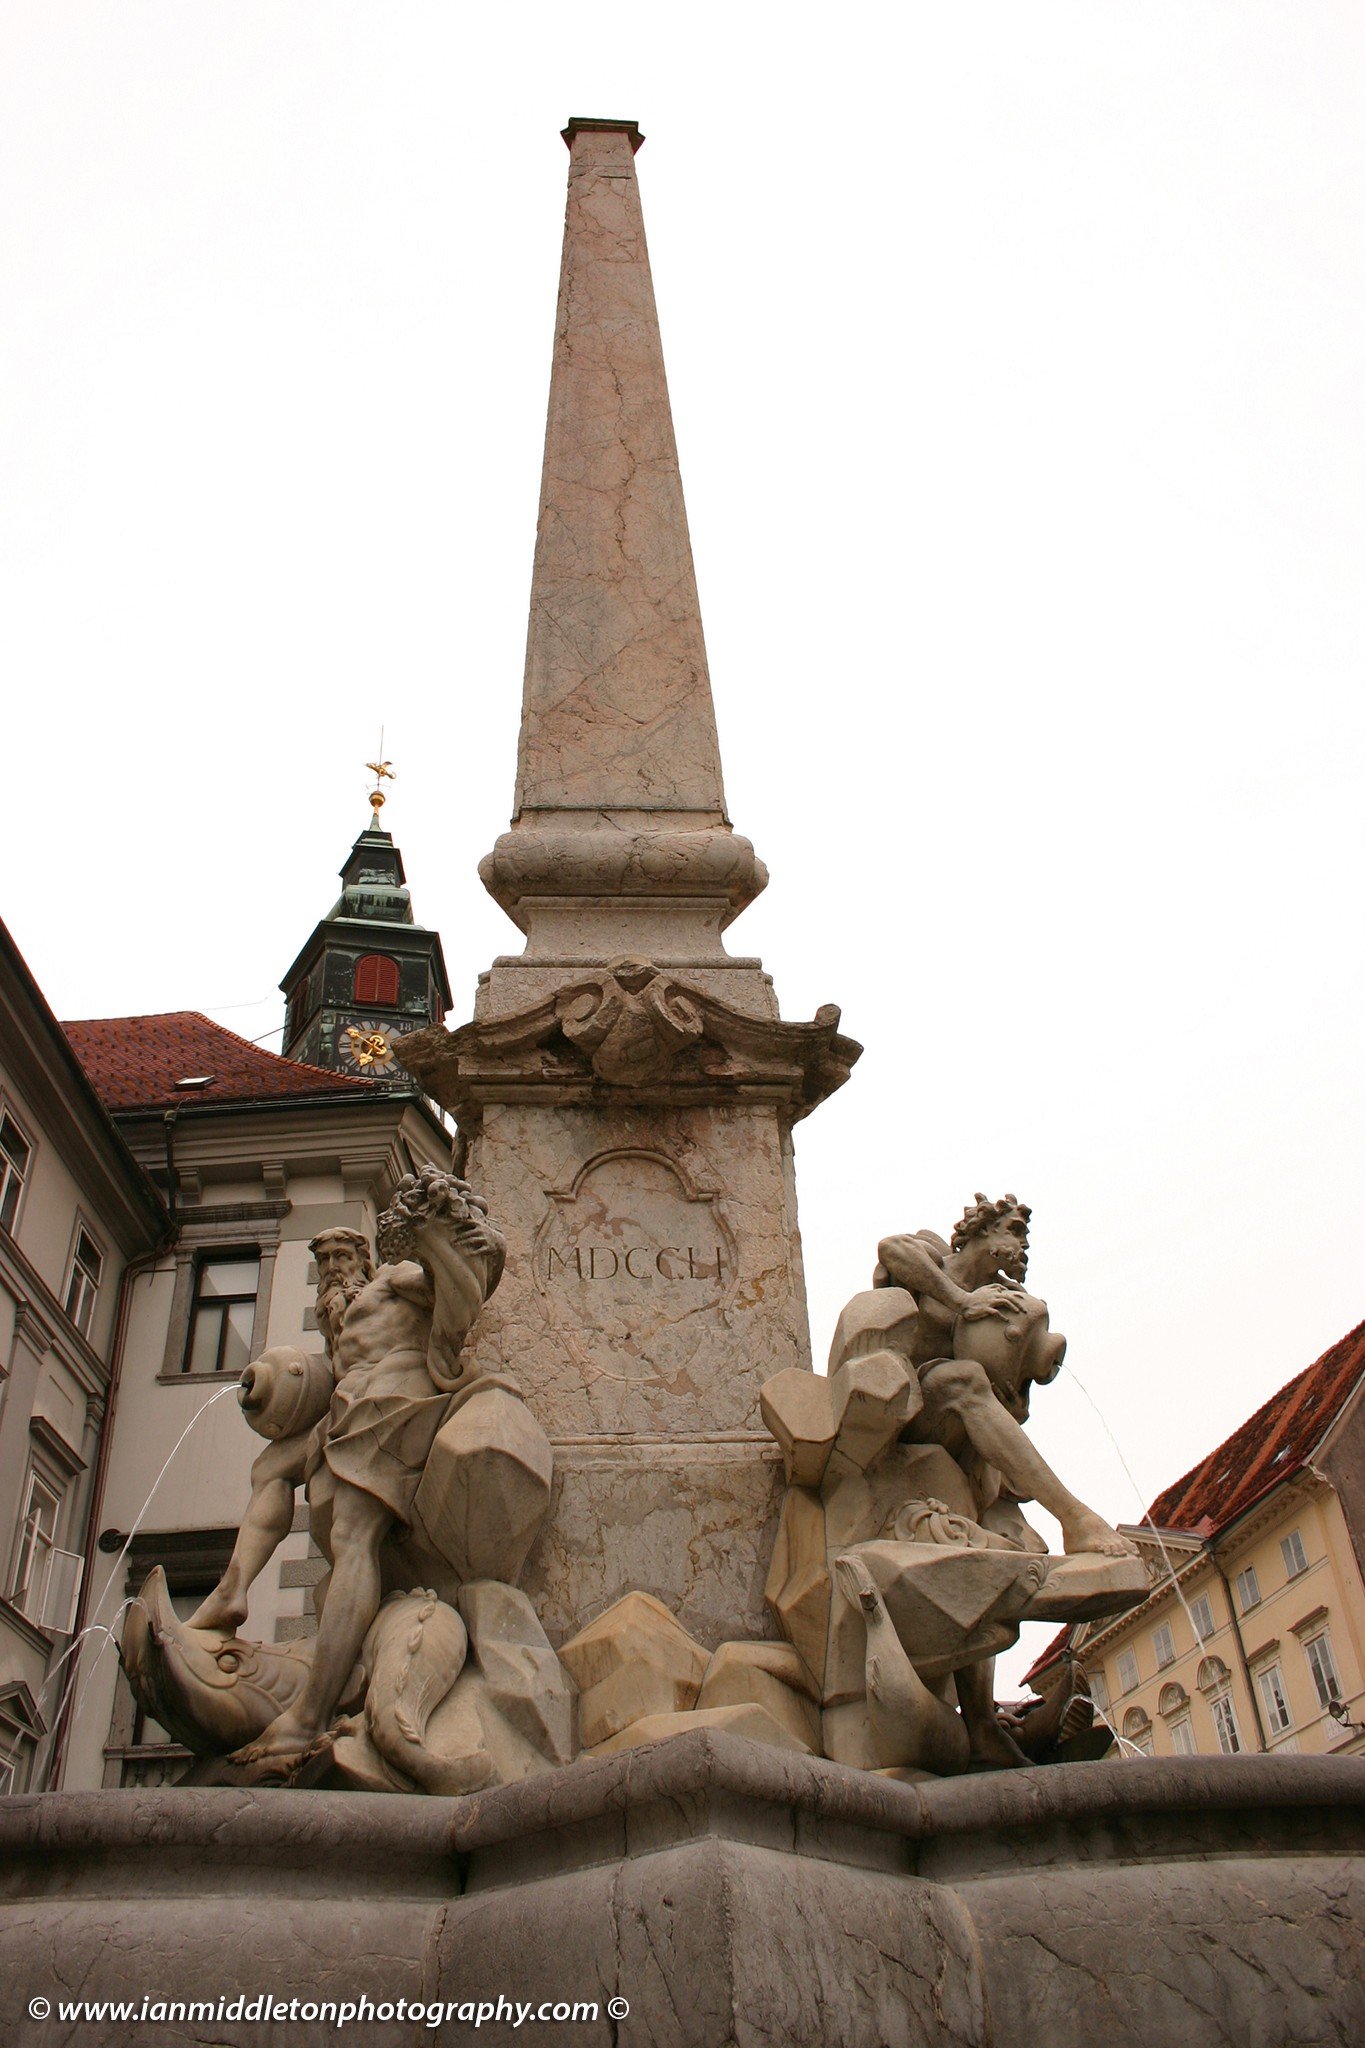 The original Robba Fountain, originally known as the Fountain of the Three Carniolan Rivers, Ljubljana, Slovenia. This was taken before it was moved to the National Gallery of Slovenia.